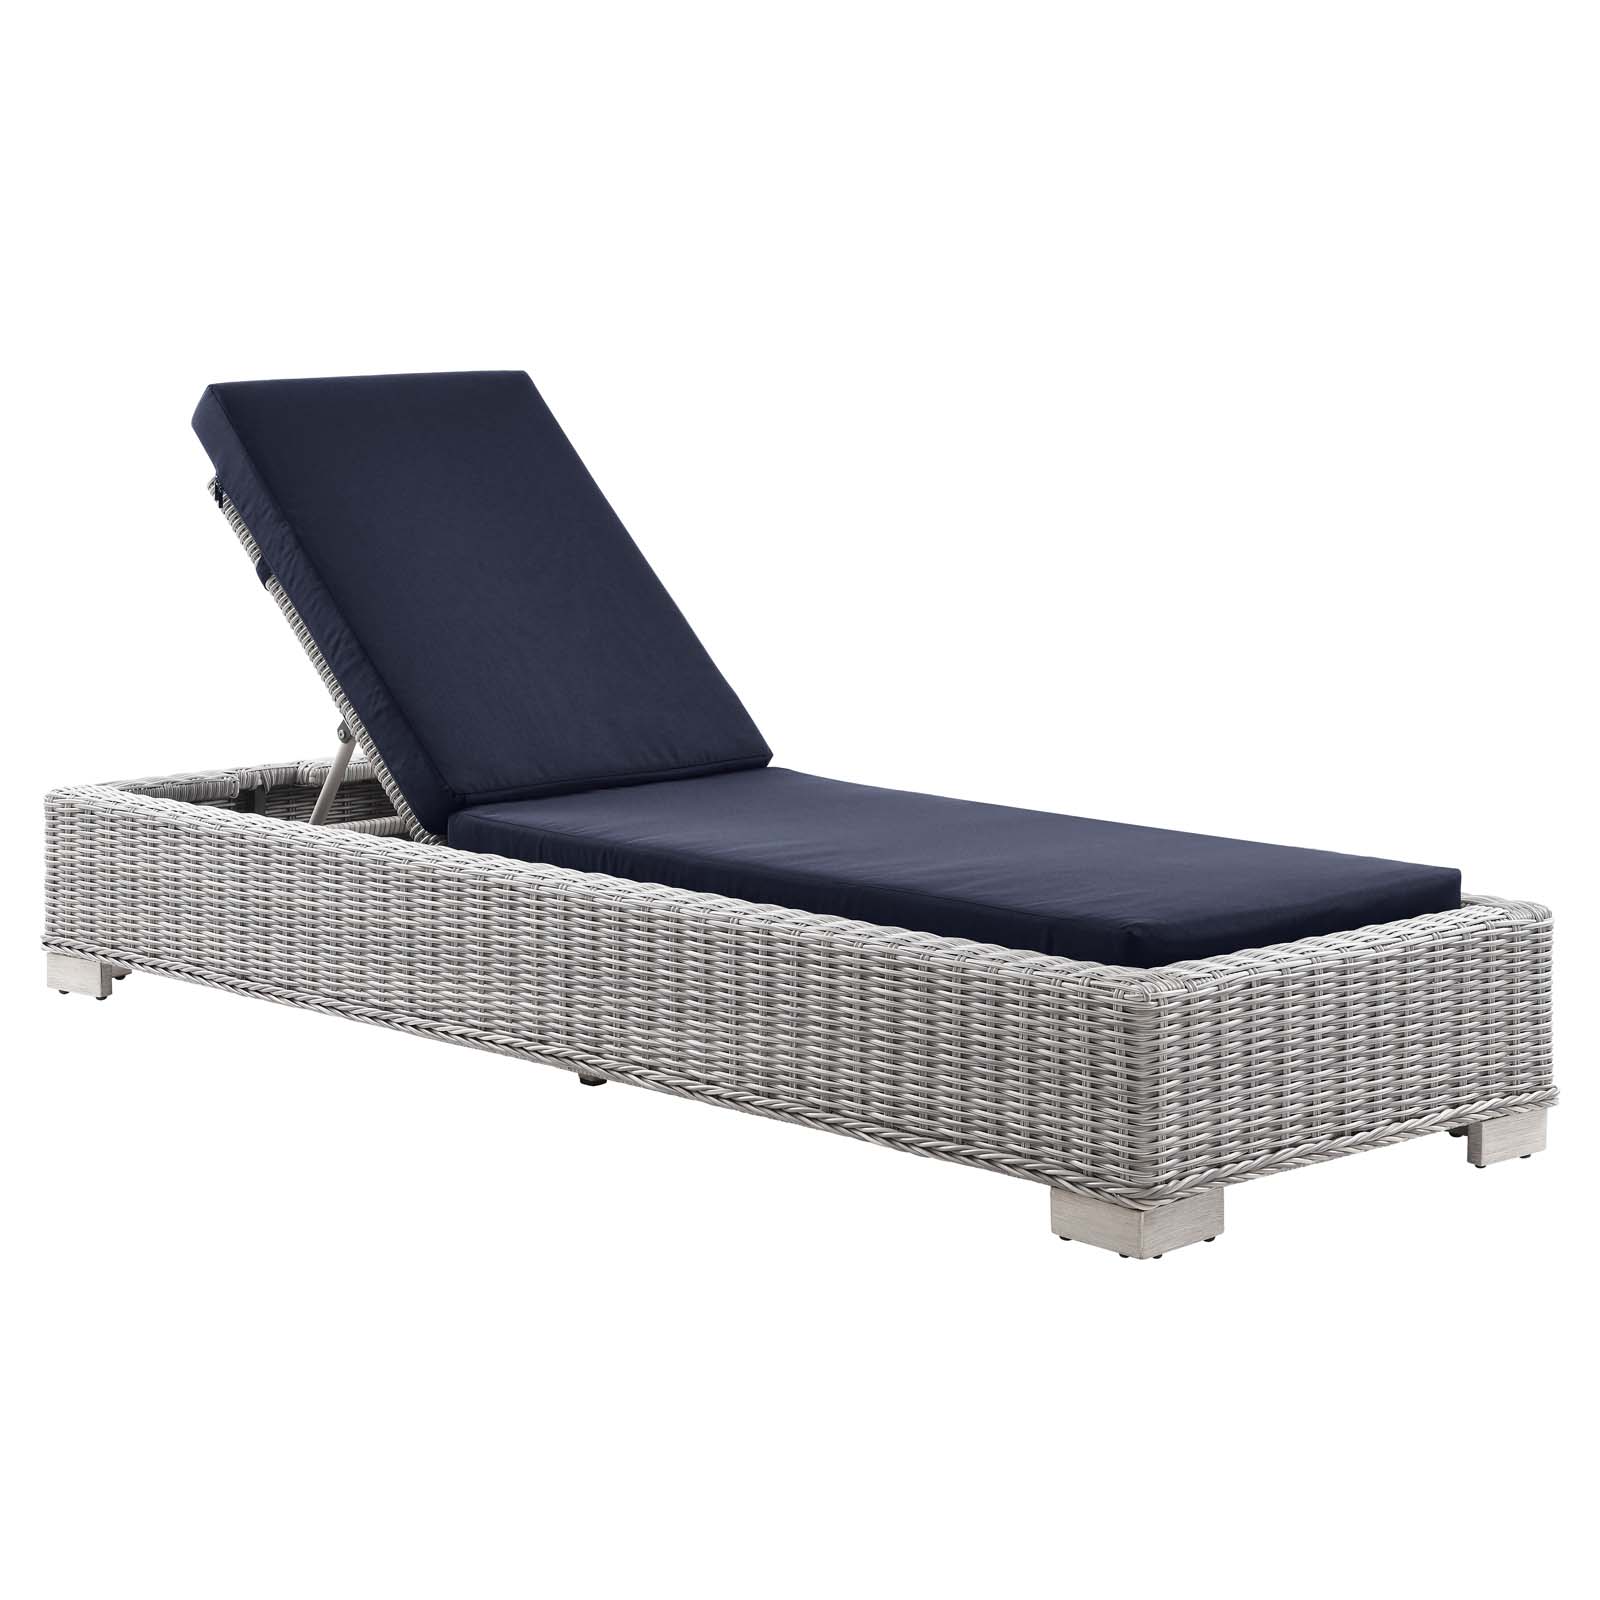 Modway Conway Outdoor Patio Wicker Rattan Chaise Lounge in Light Gray Navy - image 2 of 9